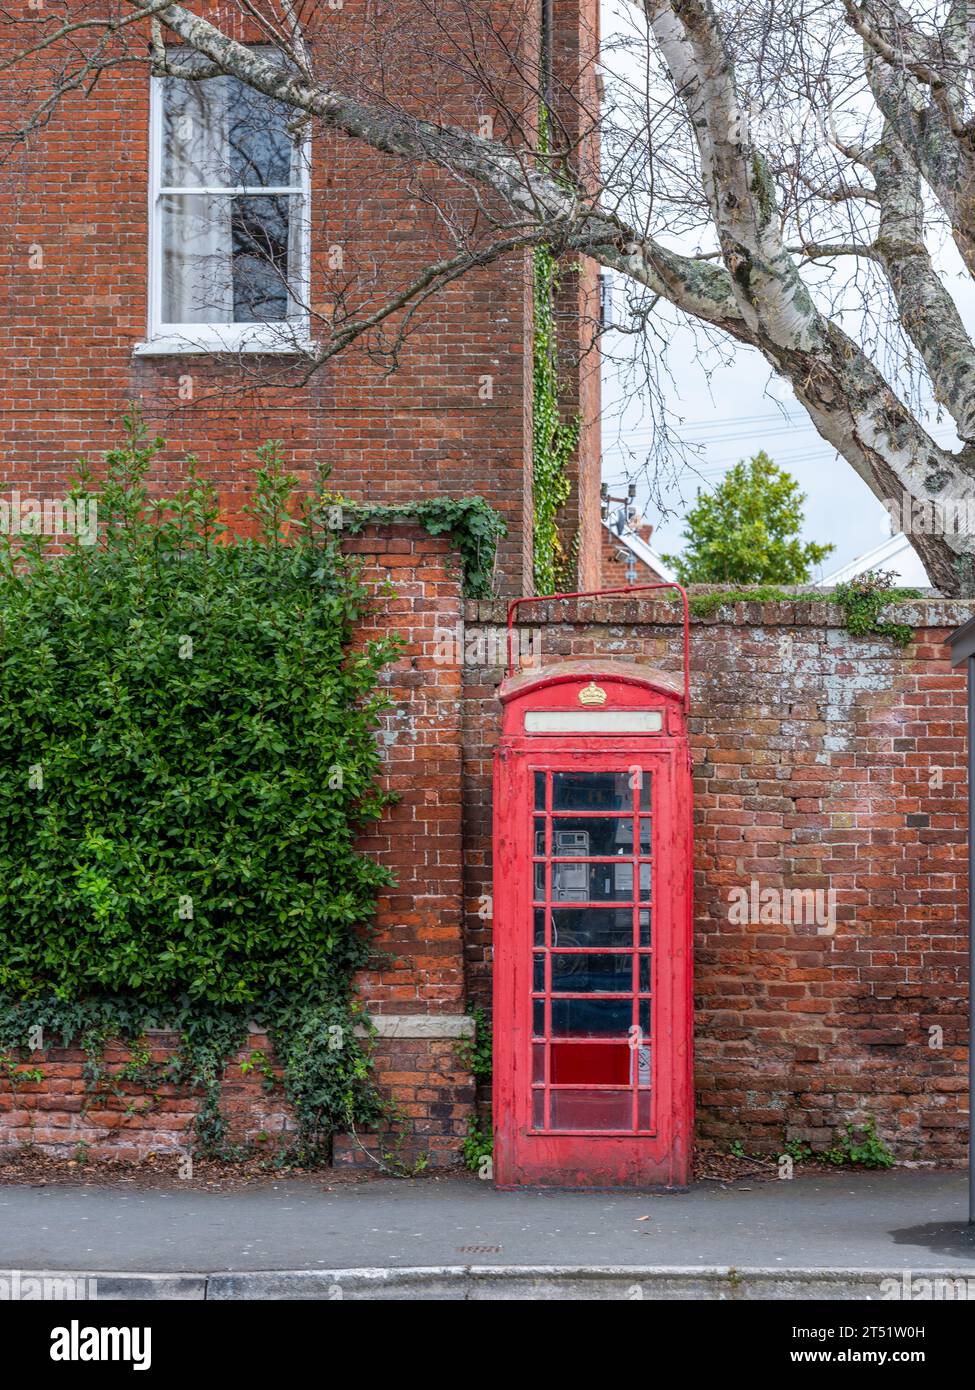 A Red British/English Telephone box in a village setting. Stock Photo